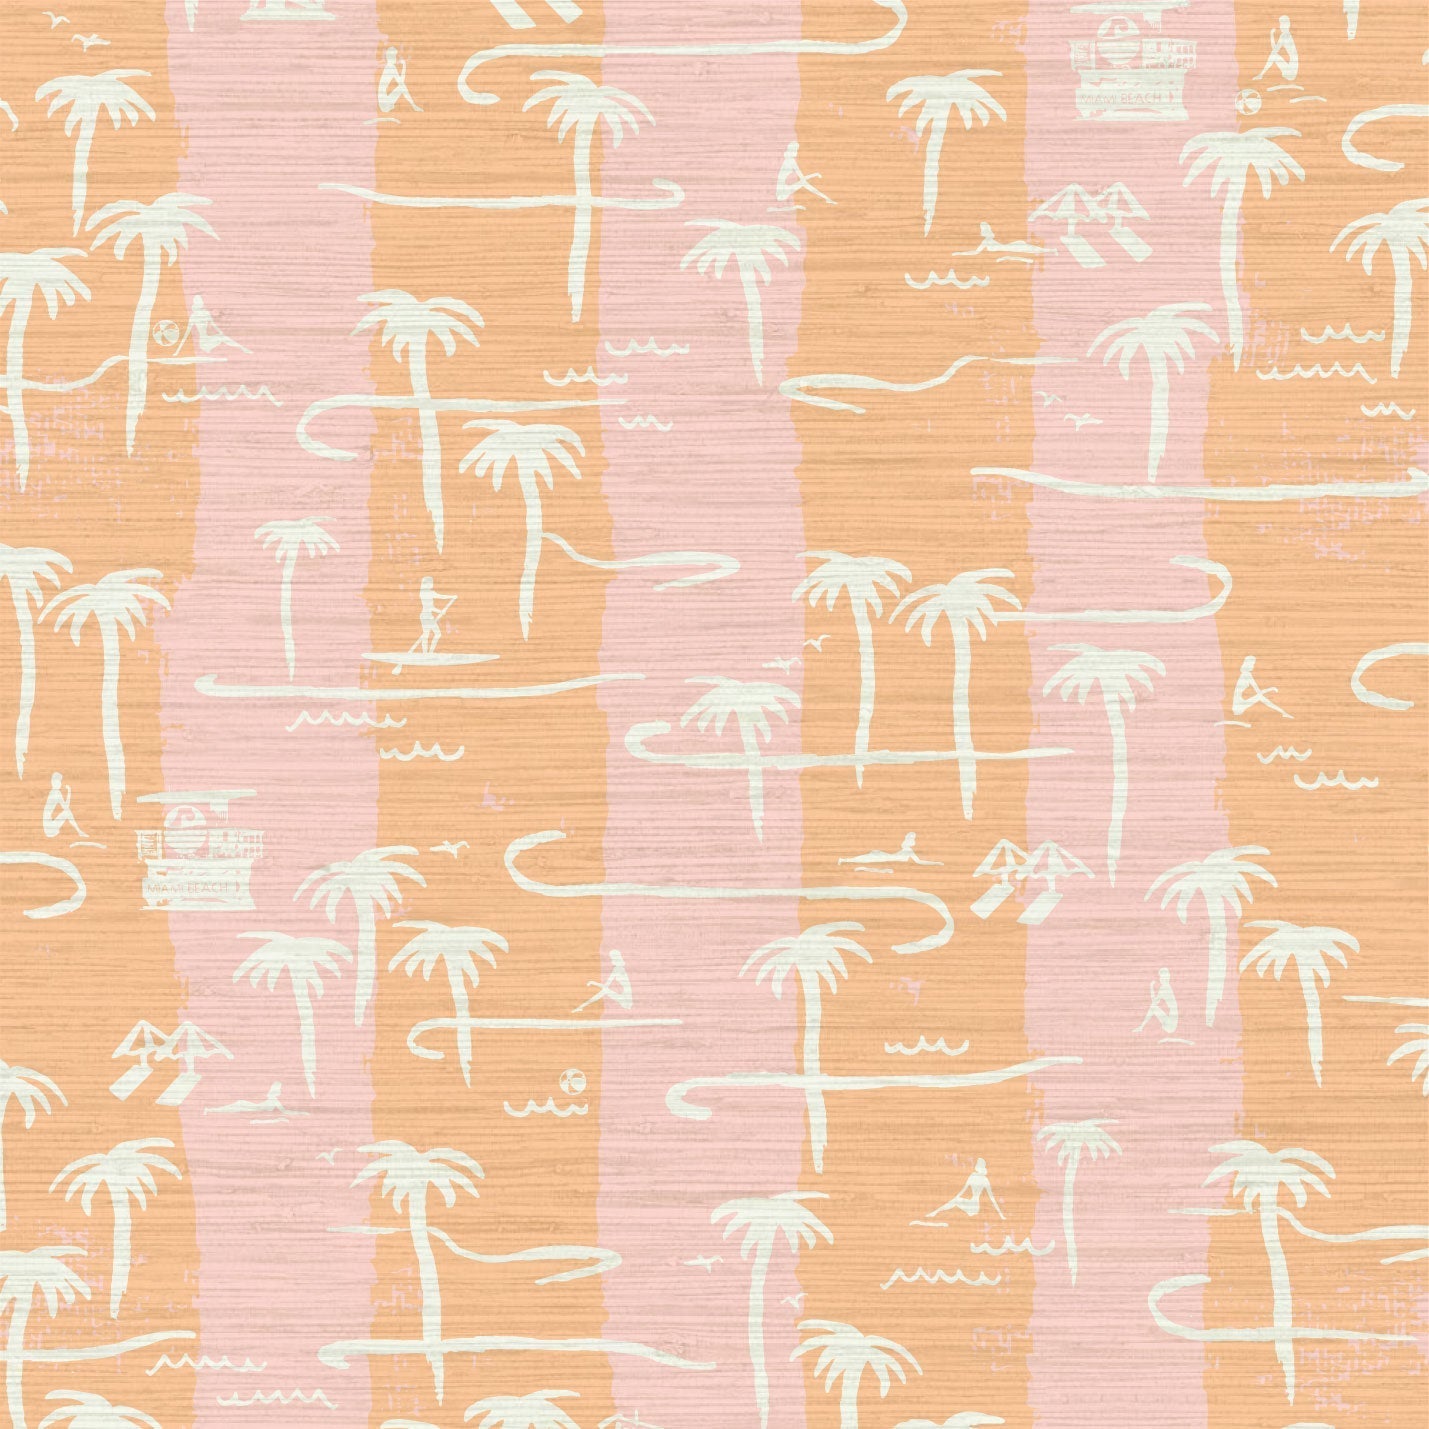 two color vertical stripe beach print featuring palm trees, beachgoers, lifeguard stands and ocean waves Grasscloth Natural Textured Eco-Friendly Non-toxic High-quality Sustainable practices Sustainability Interior Design Wall covering Bold Wallpaper Custom Tailor-made Retro chic Tropical Seaside Coastal Seashore Waterfront Vacation home styling Retreat Relaxed beach vibes Beach cottage Shoreline Oceanfront Nautical pink baby orange sunset tangerine corals